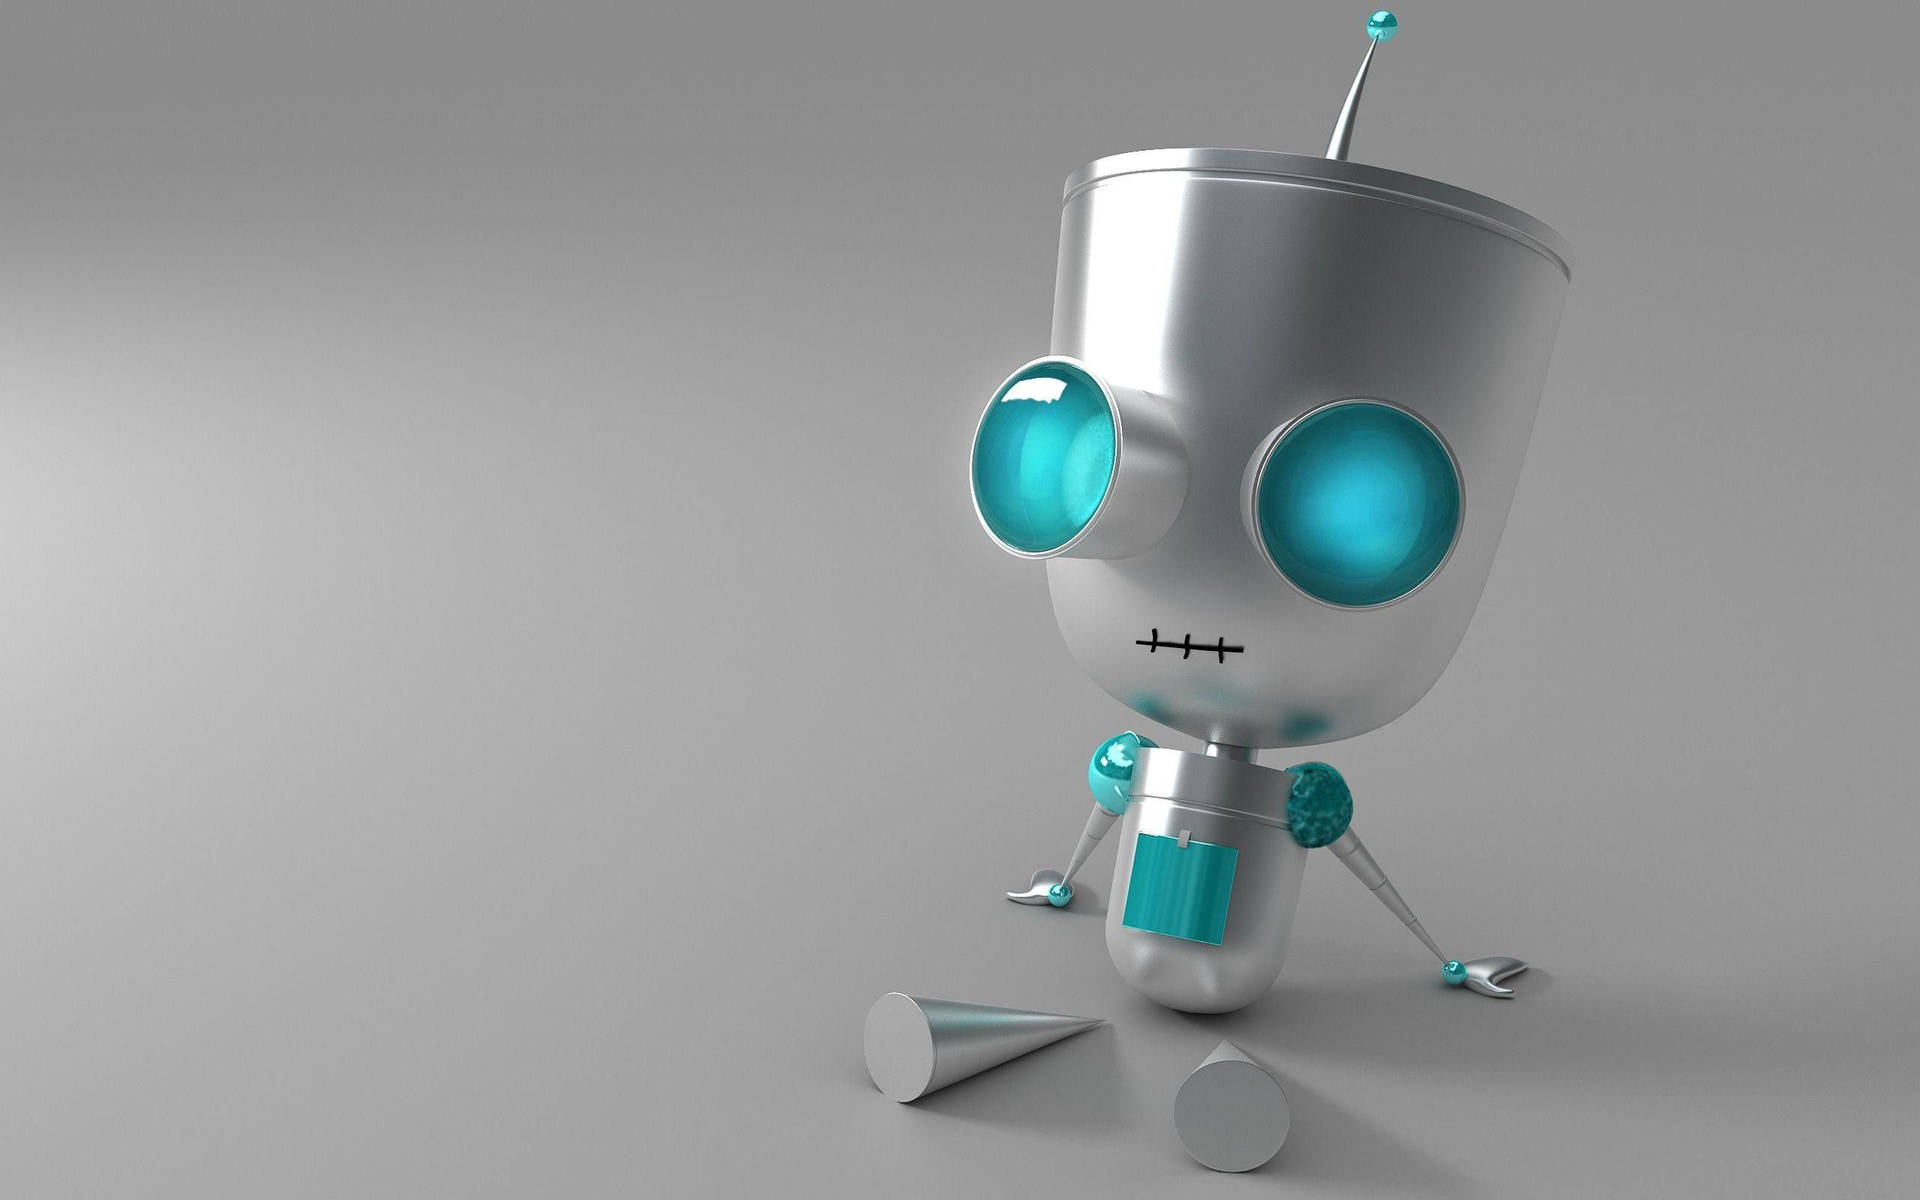 Robot 2560X1600 Wallpaper and Background Image